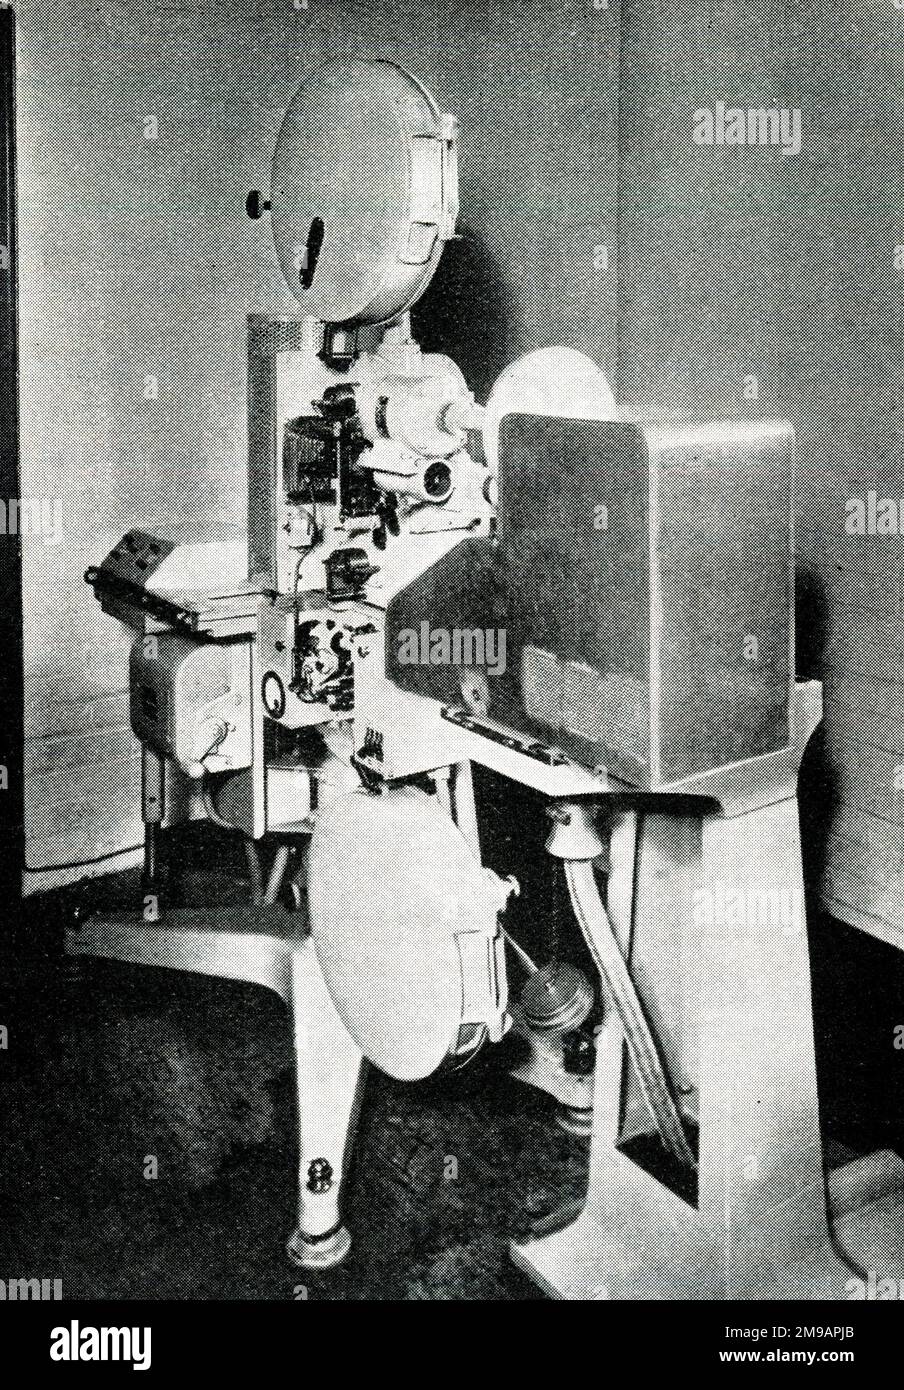 Marconi EMI 'Emitron' Camera System of Television, showing the film projector and the camera used in the televising of films. Stock Photo